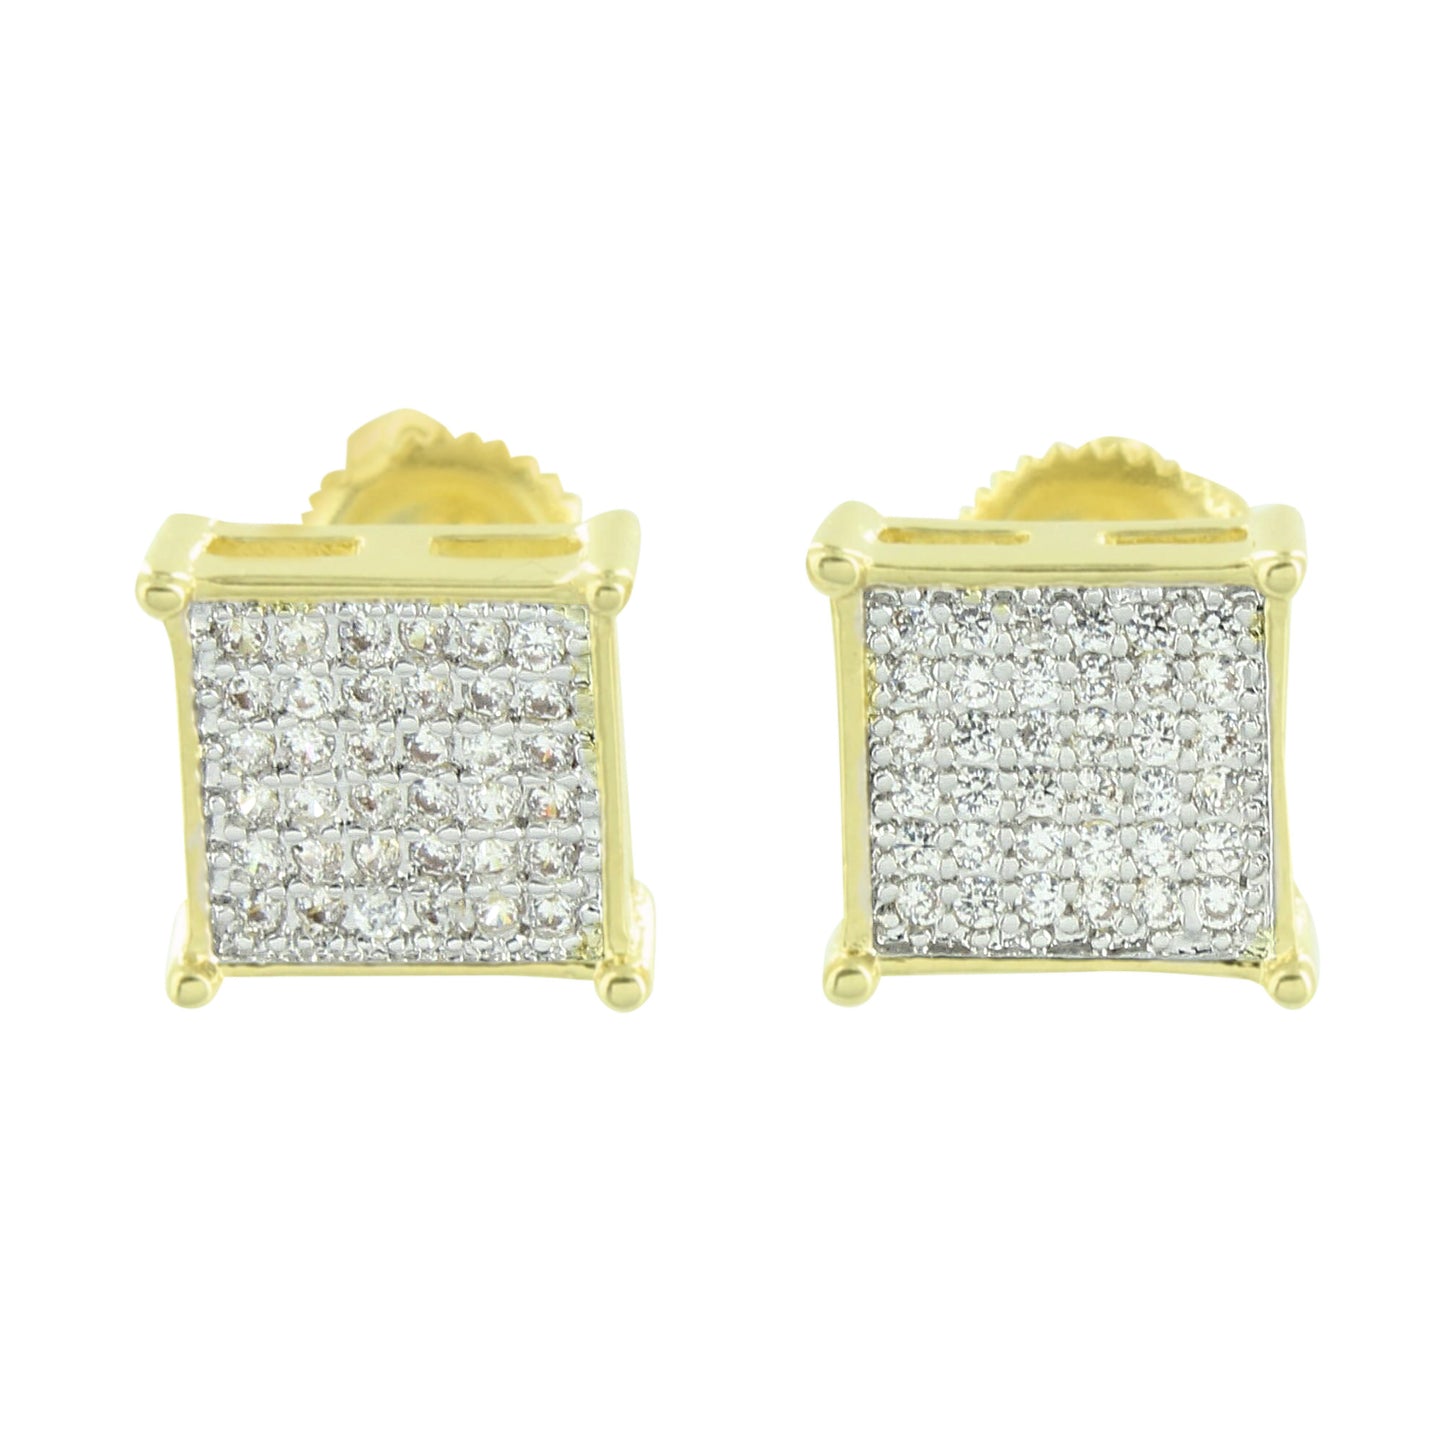 Screw Back Square Earrings Micro Pave Yellow Gold Finish 8 MM